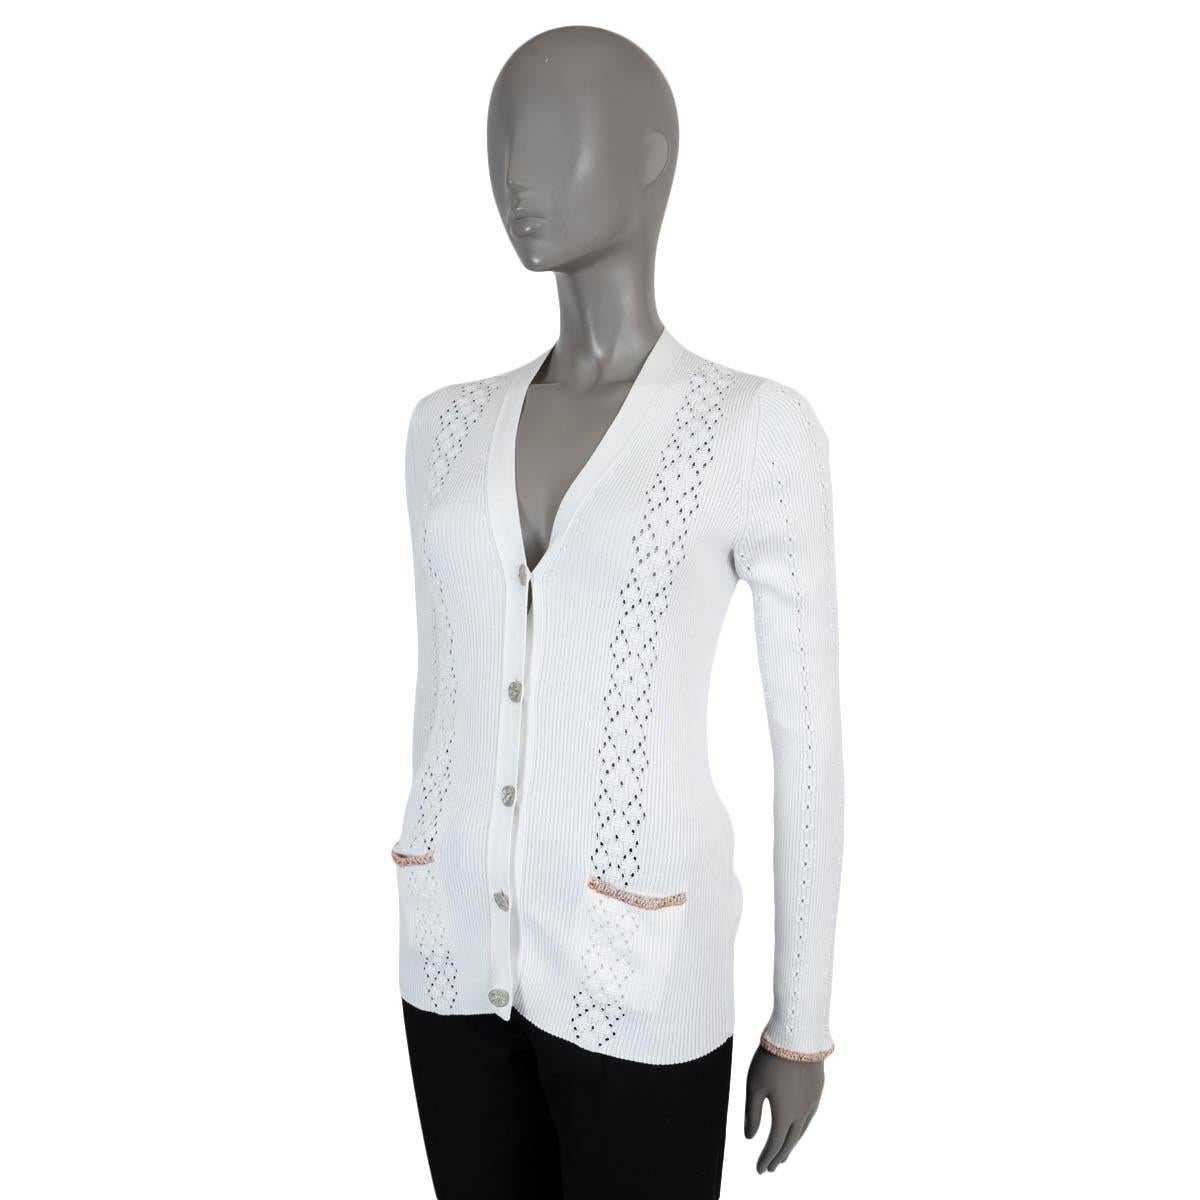 100% authentic Chanel cardigan in white rib-knit cotton (100% - please note the content tag is missing). Features a V-neck, pointelle stripes and tweed trims in orange and pink. Closes with Coco Cuba buttons. Has been worn and shows very faint